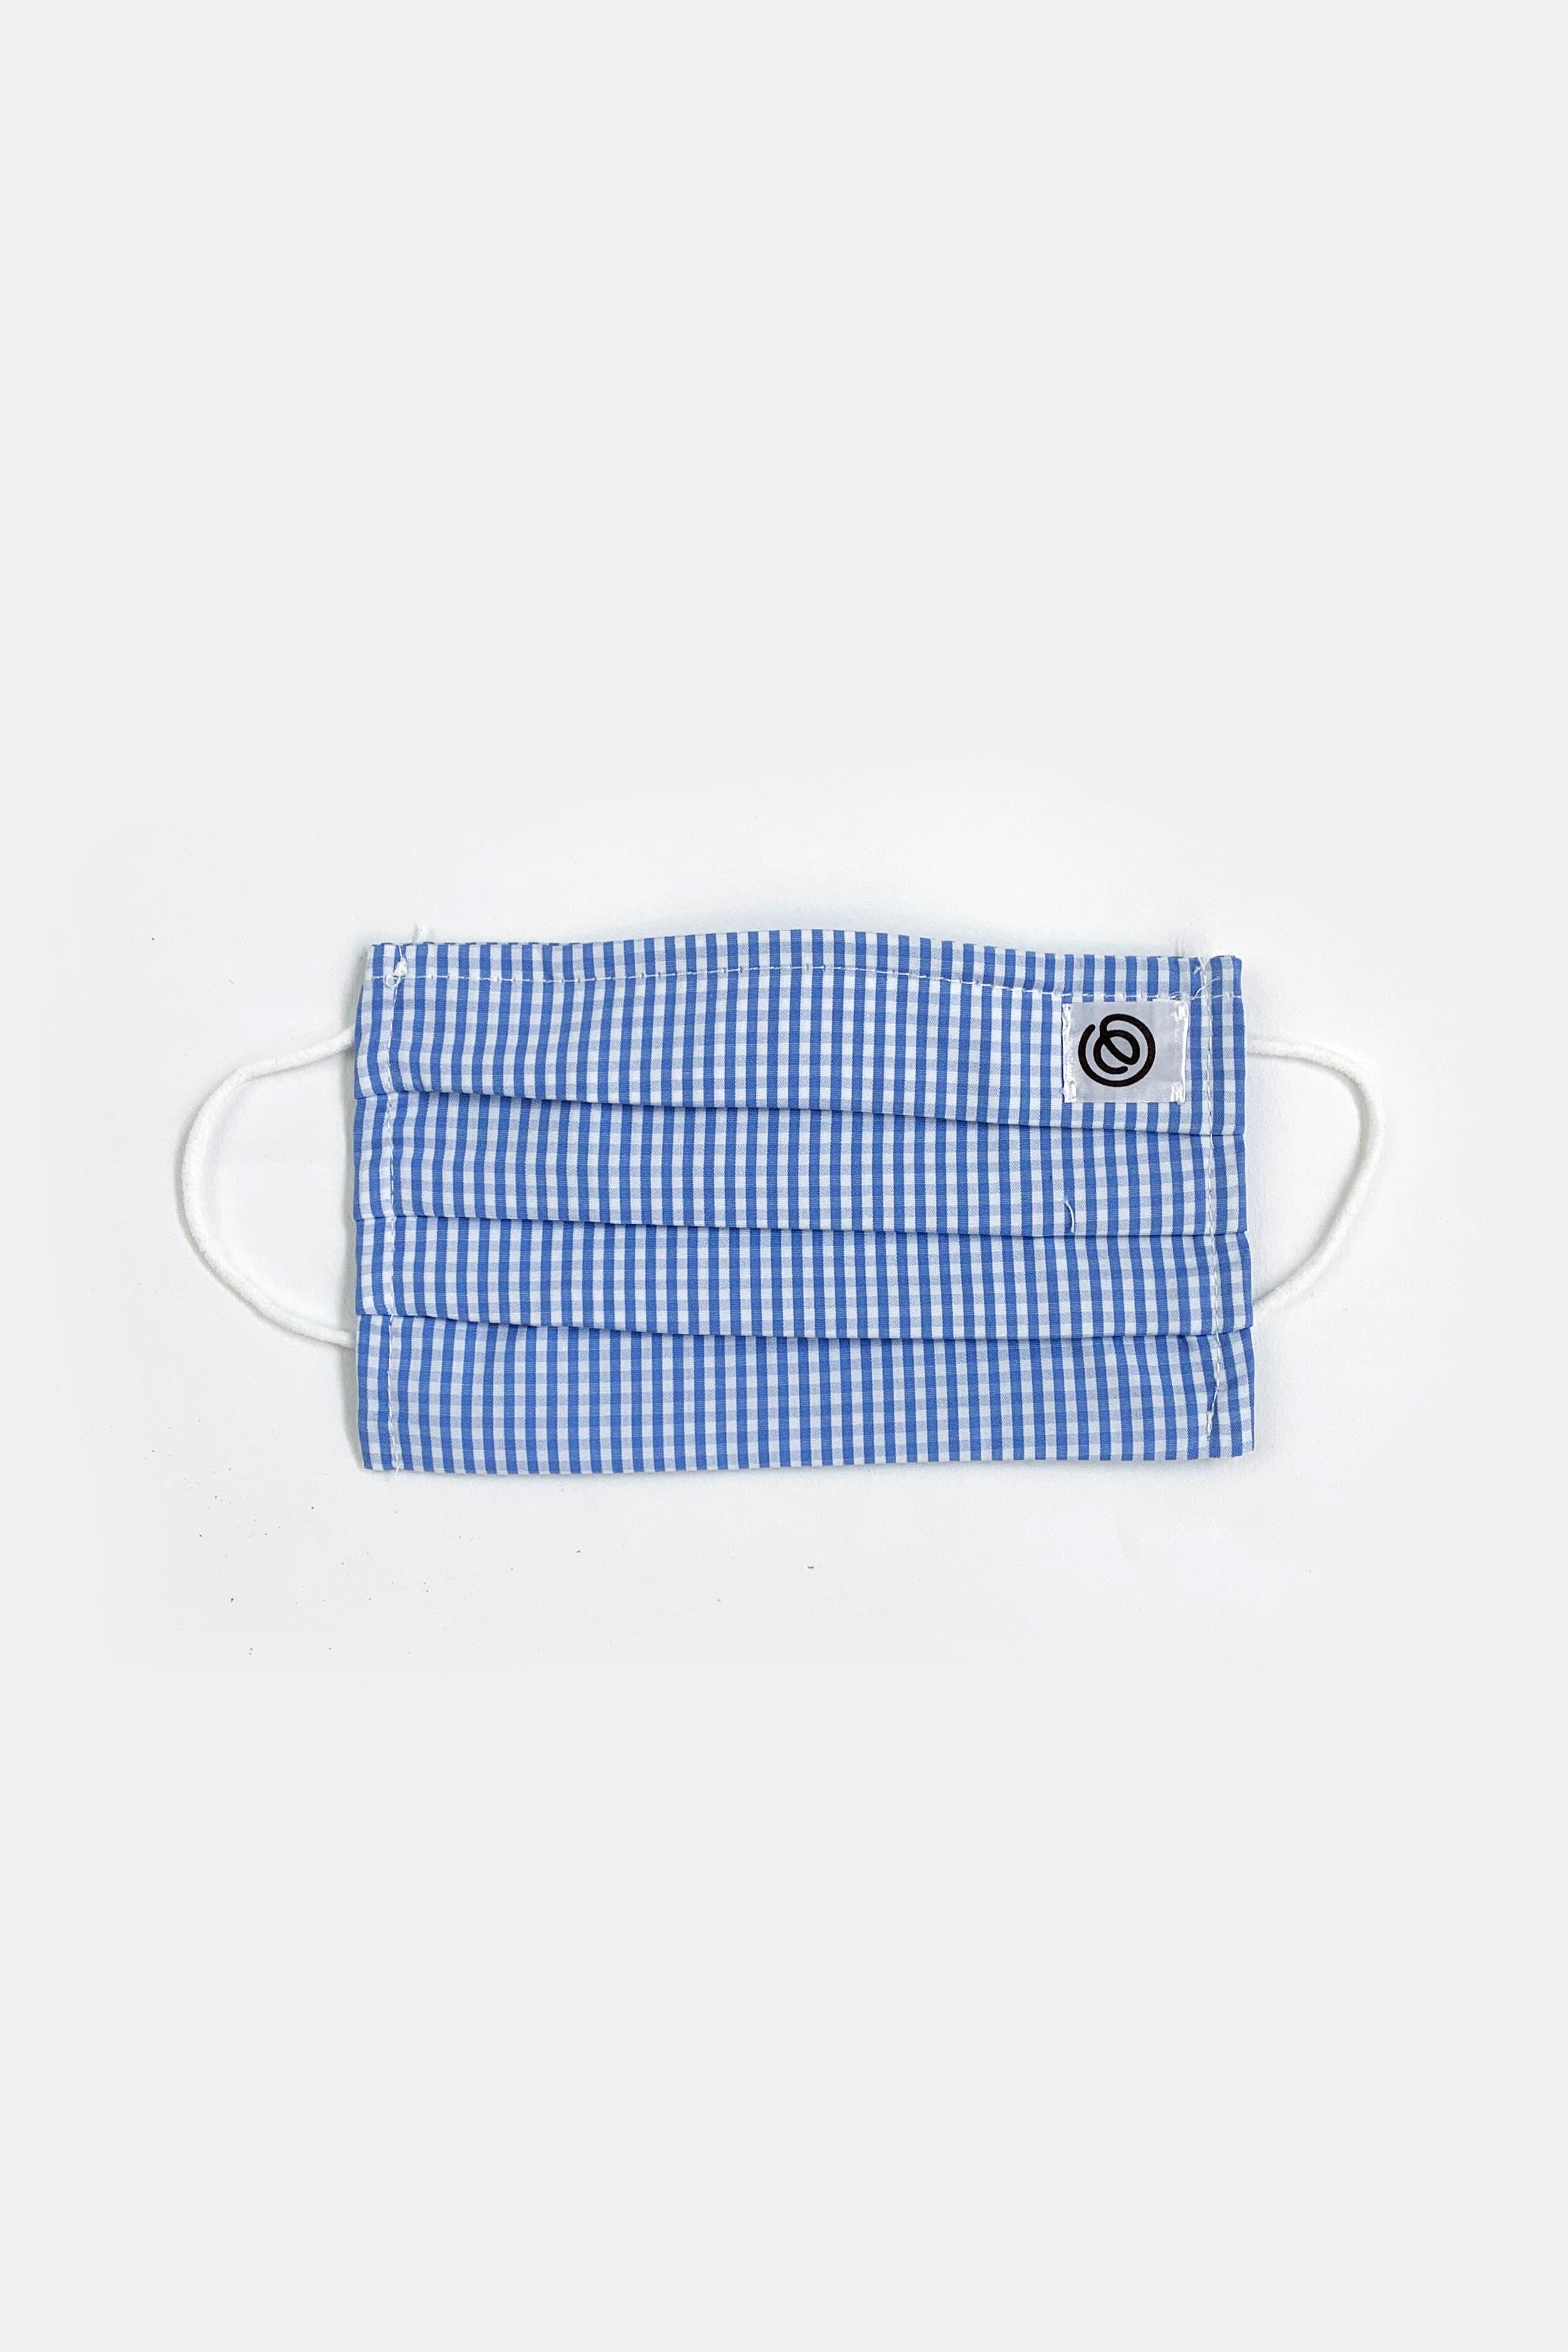 Easy Mondays Pleated Face Mask in Blue Gingham